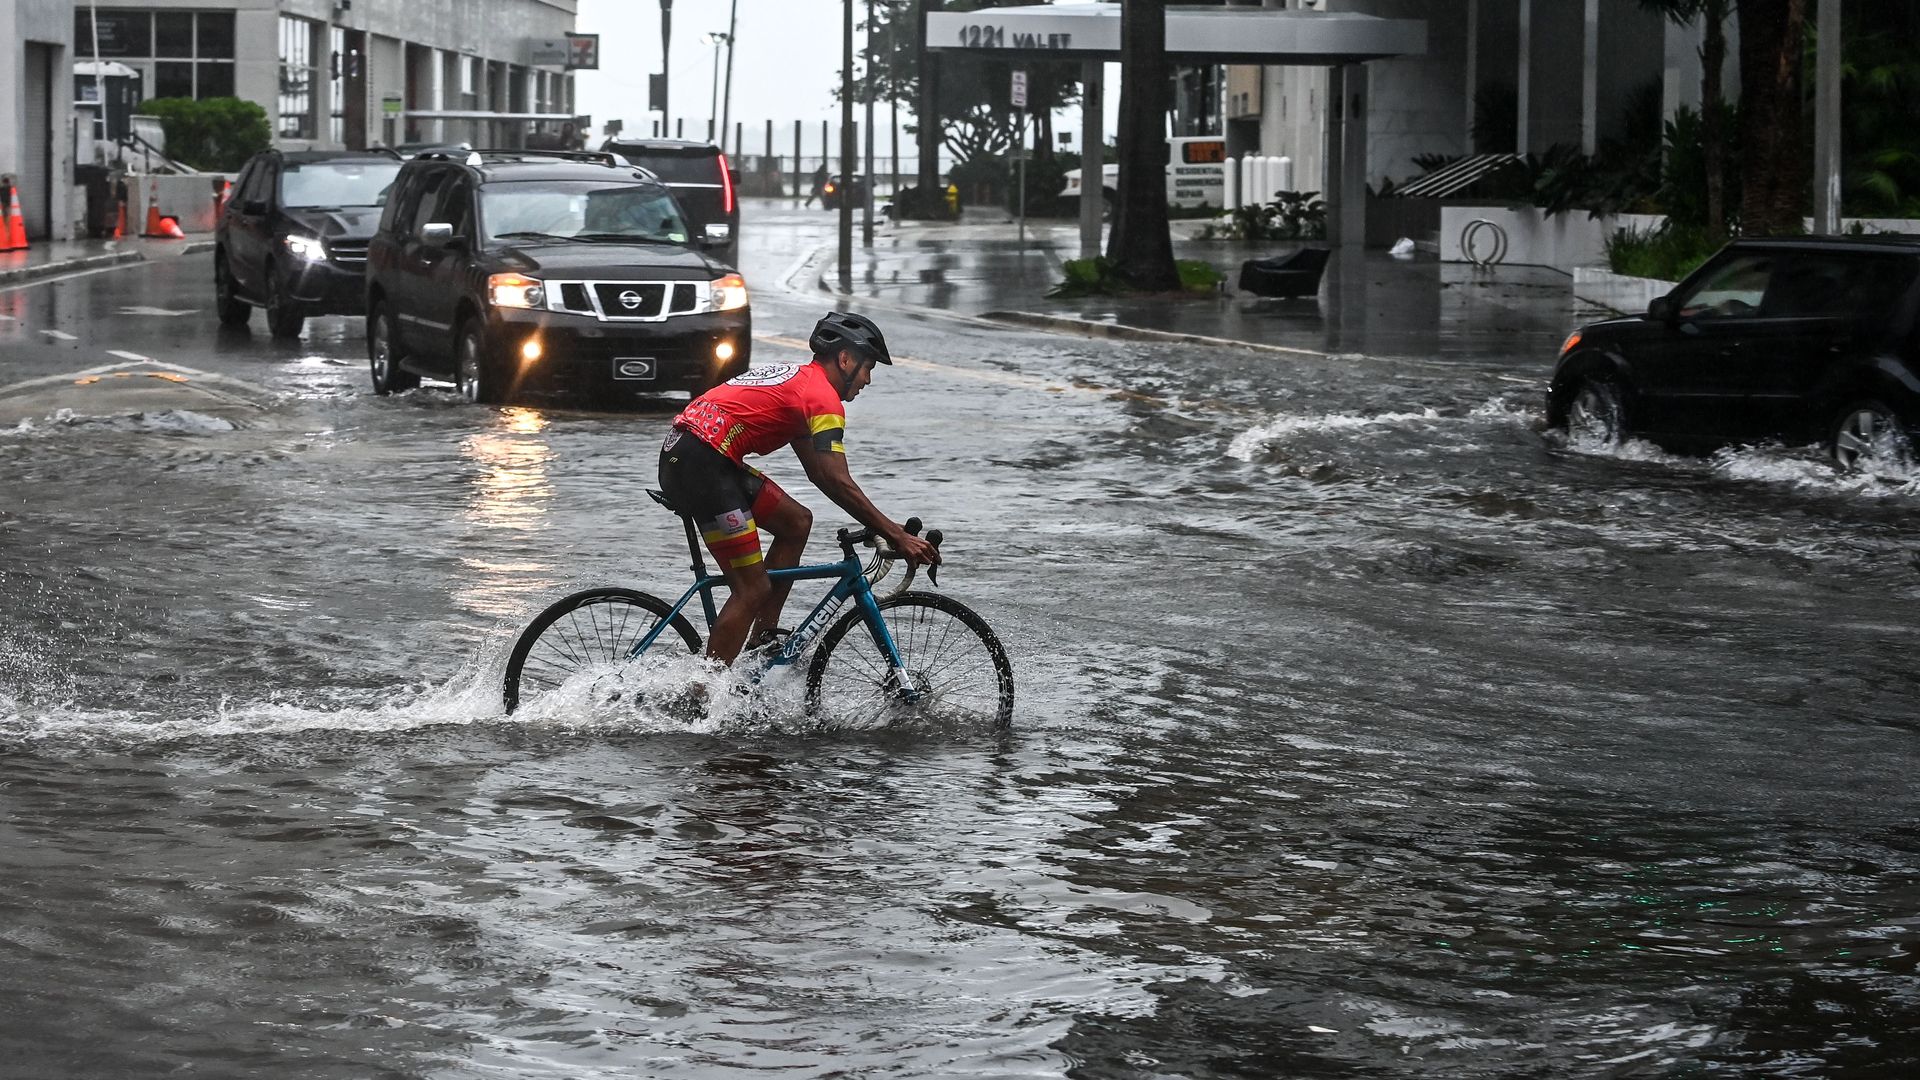 A cyclist rides through the flooded street during heavy rain and wind as tropical storm Eta approaches the south of Florida, in Miami, Florida on November 9